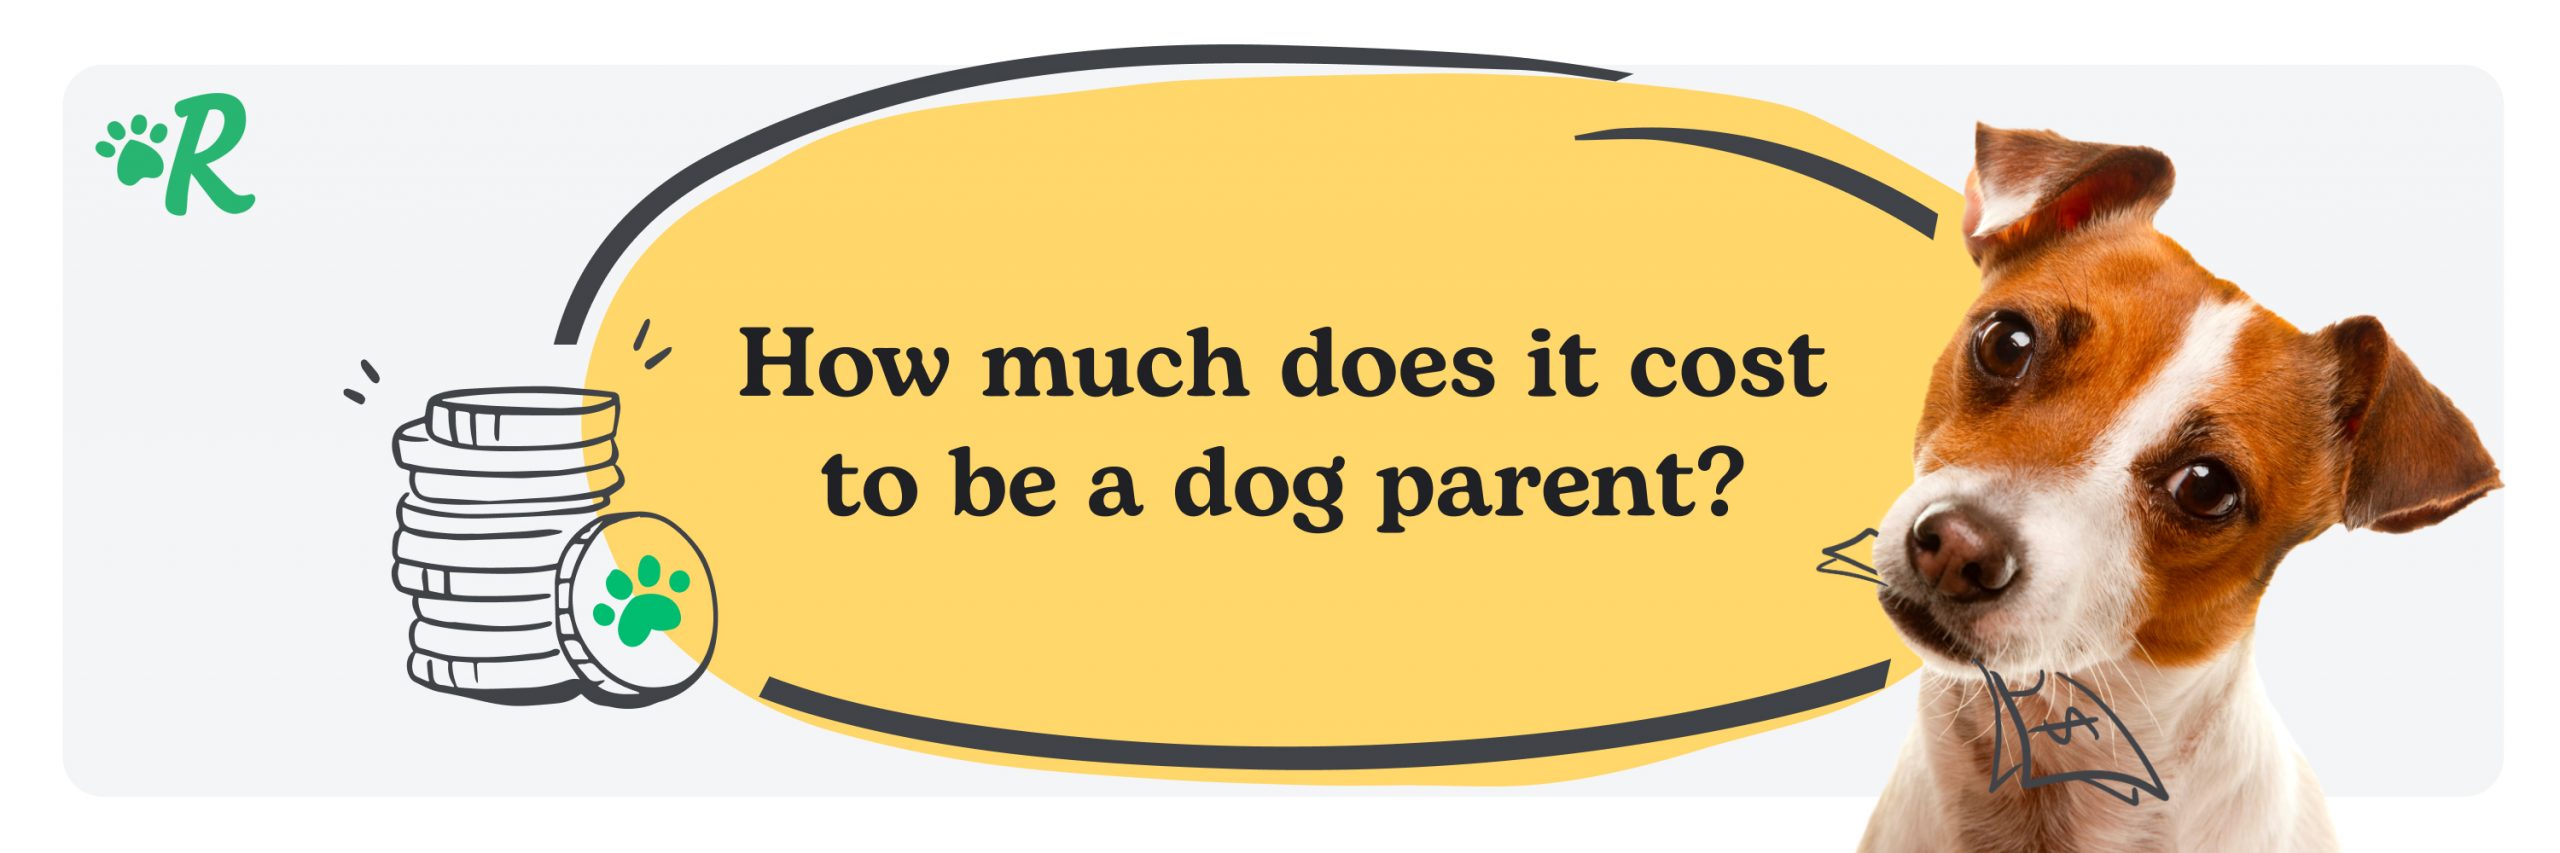 A graphic with a dog and the title "how much does it cost to be a dog parent?"